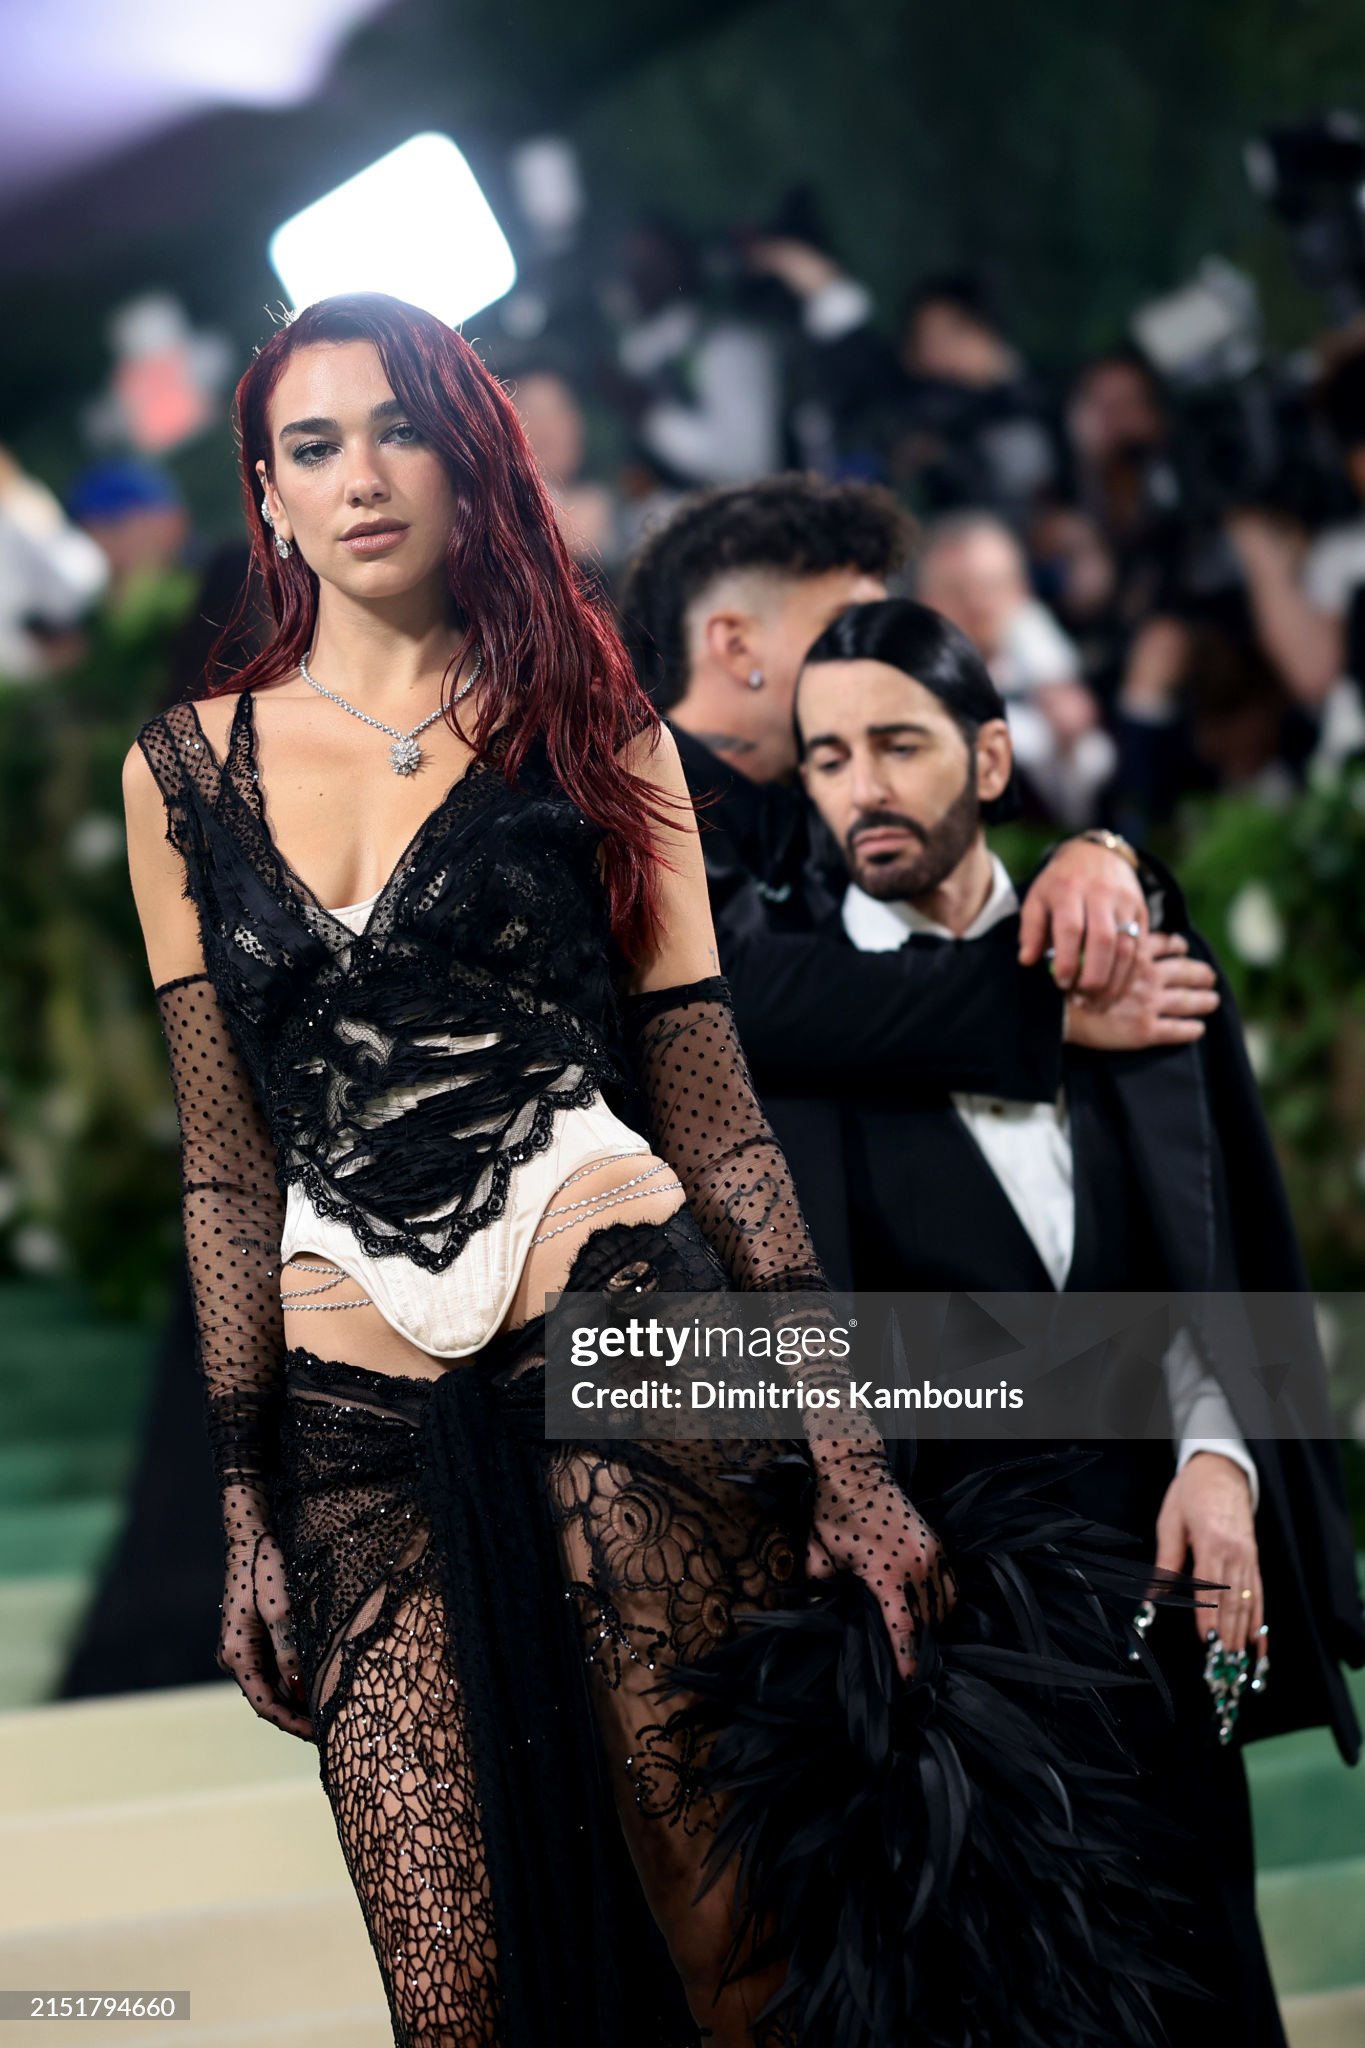 gettyimages-2151794660-2048x2048.jpg